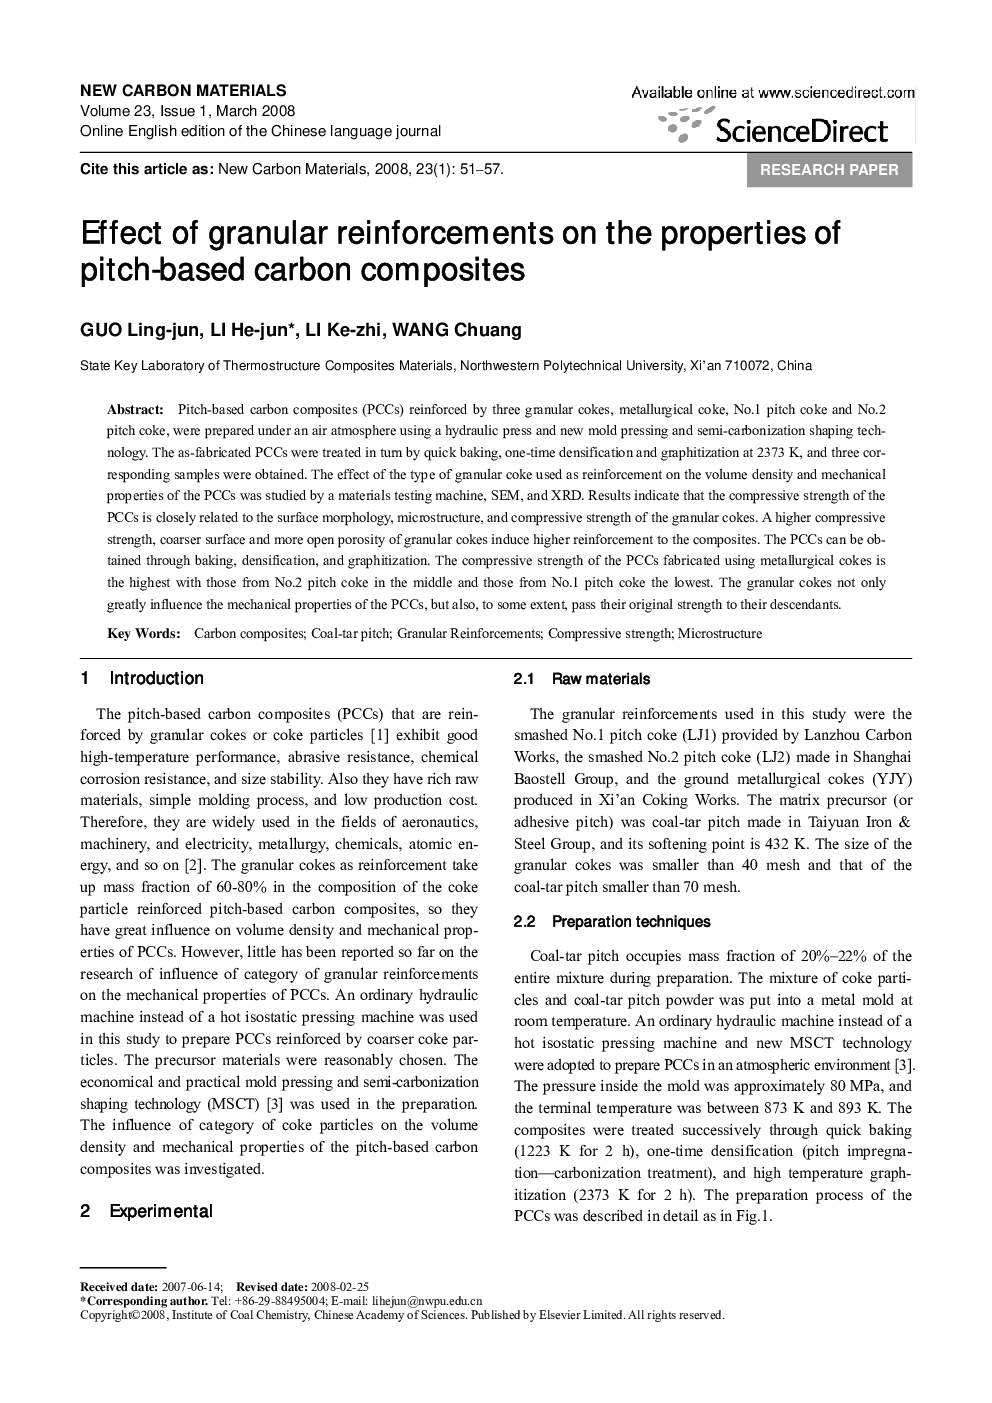 Effect of granular reinforcements on the properties of pitch-based carbon composites